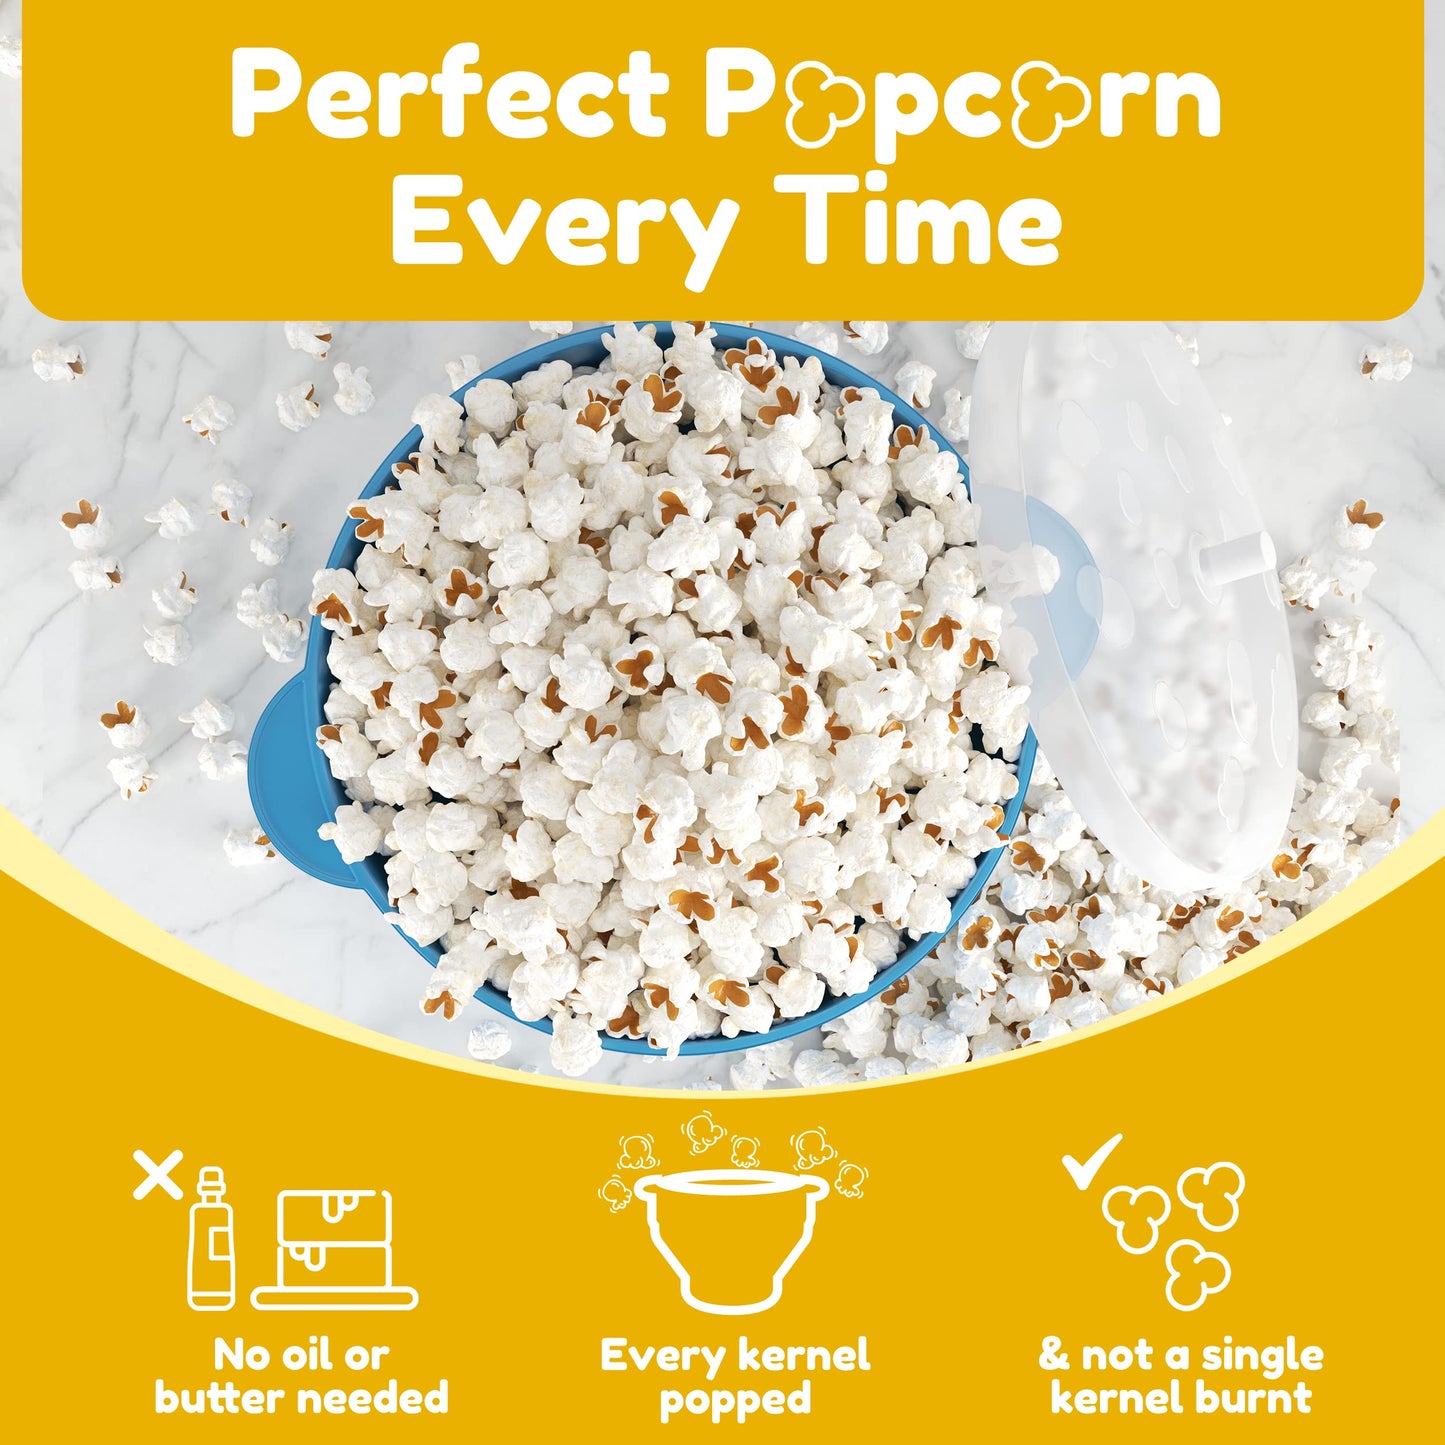 The Original Popco Silicone Microwave Popcorn Popper with Handles, Silicone Popcorn Maker, Collapsible Popcorn Bowls Bpa Free and Dishwasher Safe - 15 Colors Available (AQUA)